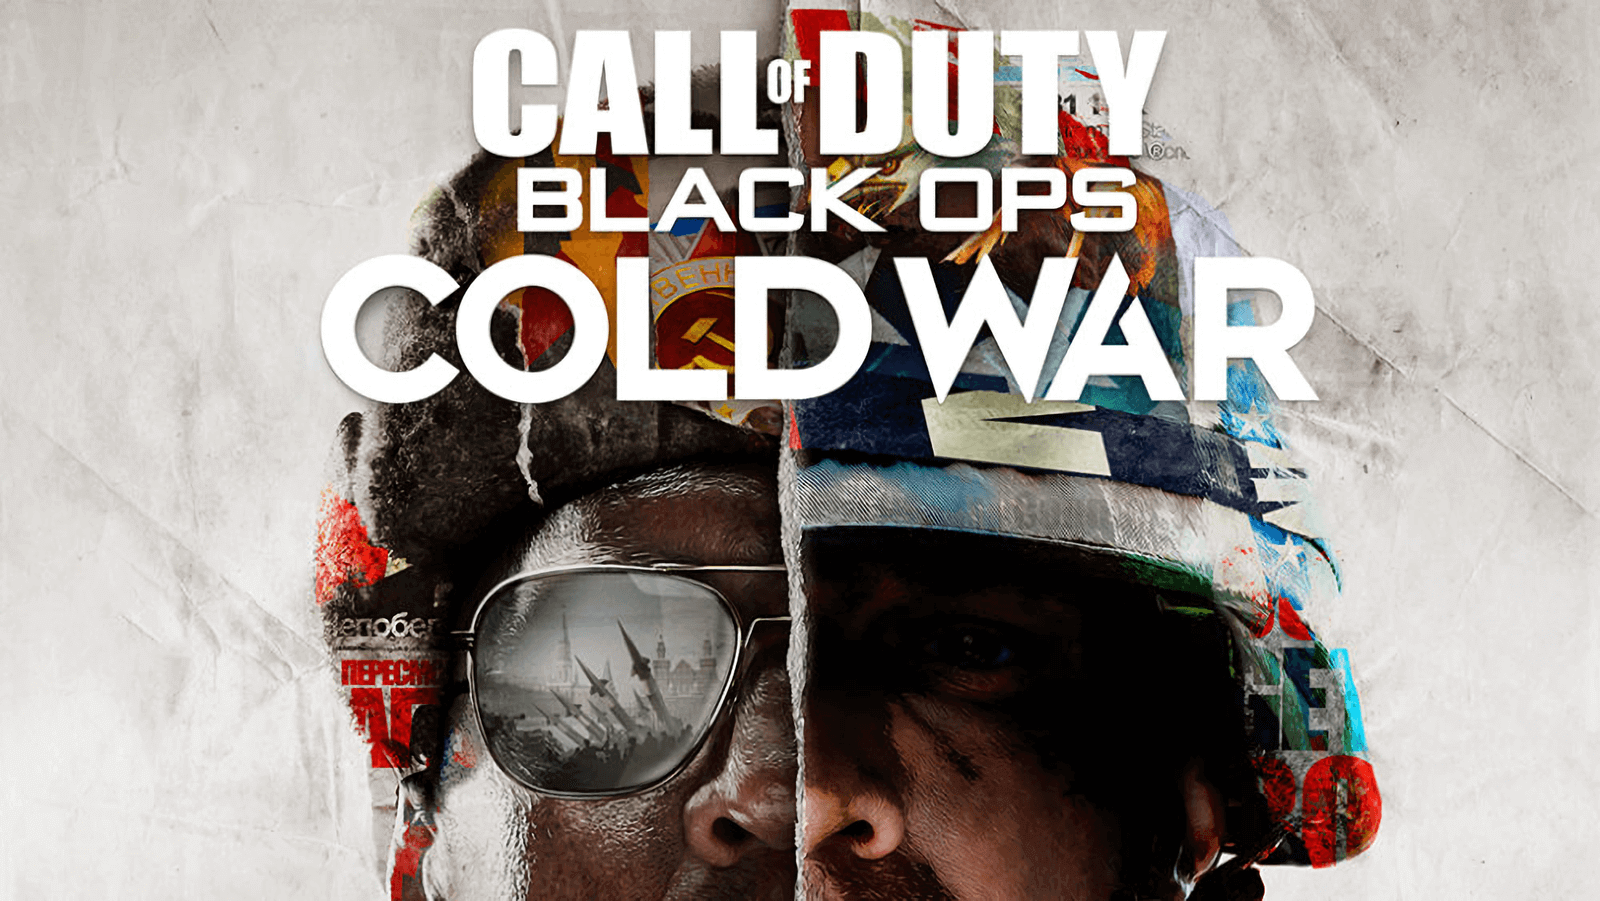 Activision is giving away 10,000 beta keys for Call of Duty: Black Ops Cold War